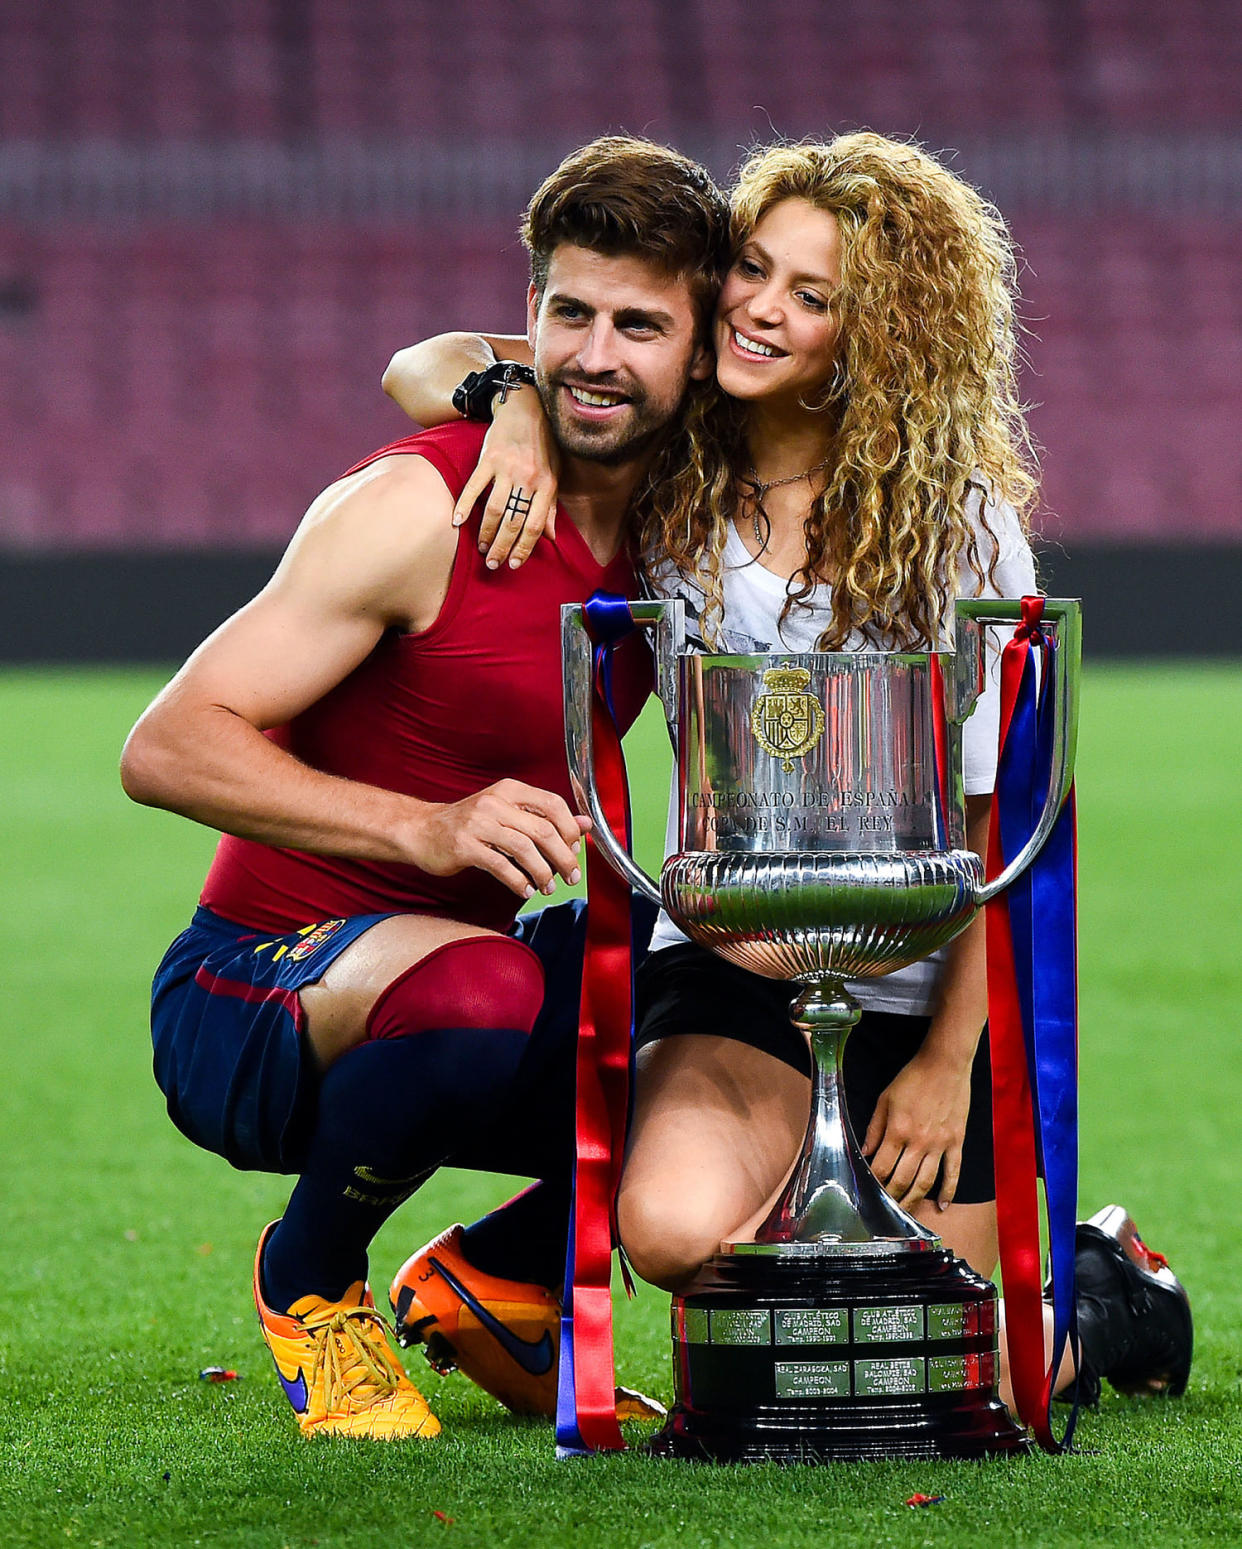 Gerard Pique of FC Barcelona and Shakira pose with the trophy after FC Barcelona won the Copa del Rey Final match against Athletic Club at Camp Nou on May 30, 2015 in Barcelona, Spain. (David Ramos / Getty Images)